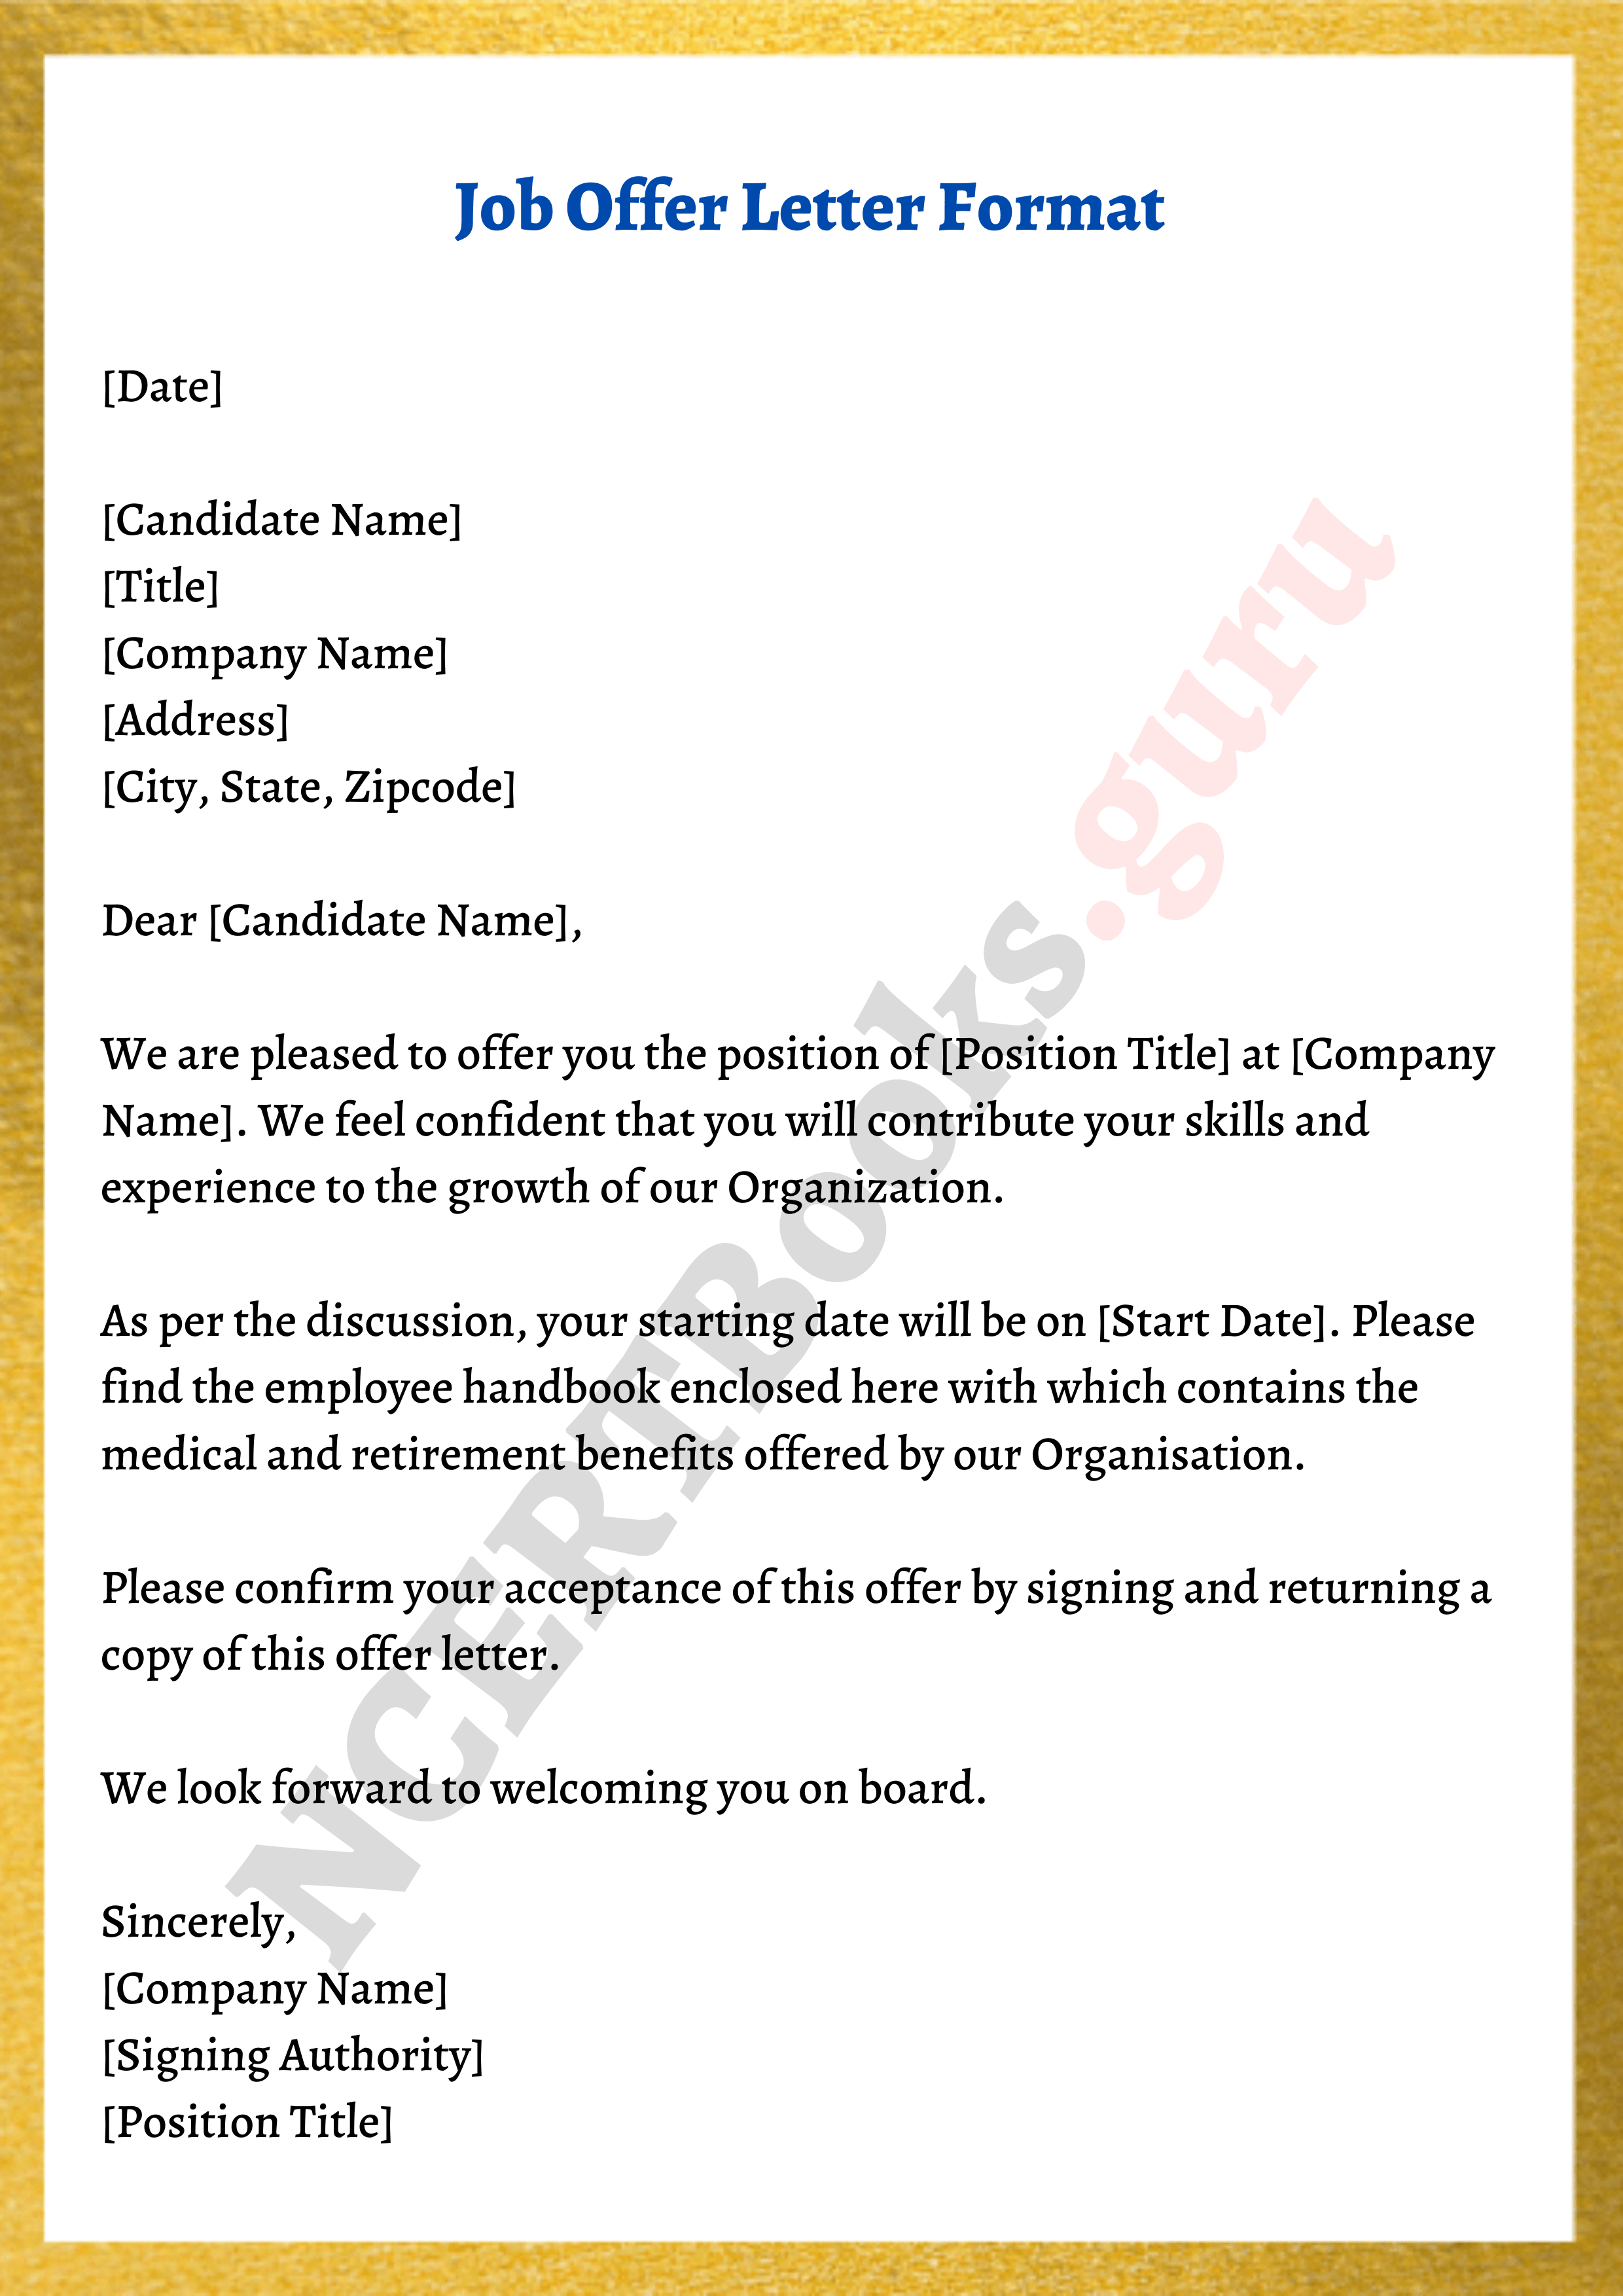 examples-of-offer-letters-for-employment-cv-template-word-2018-resume